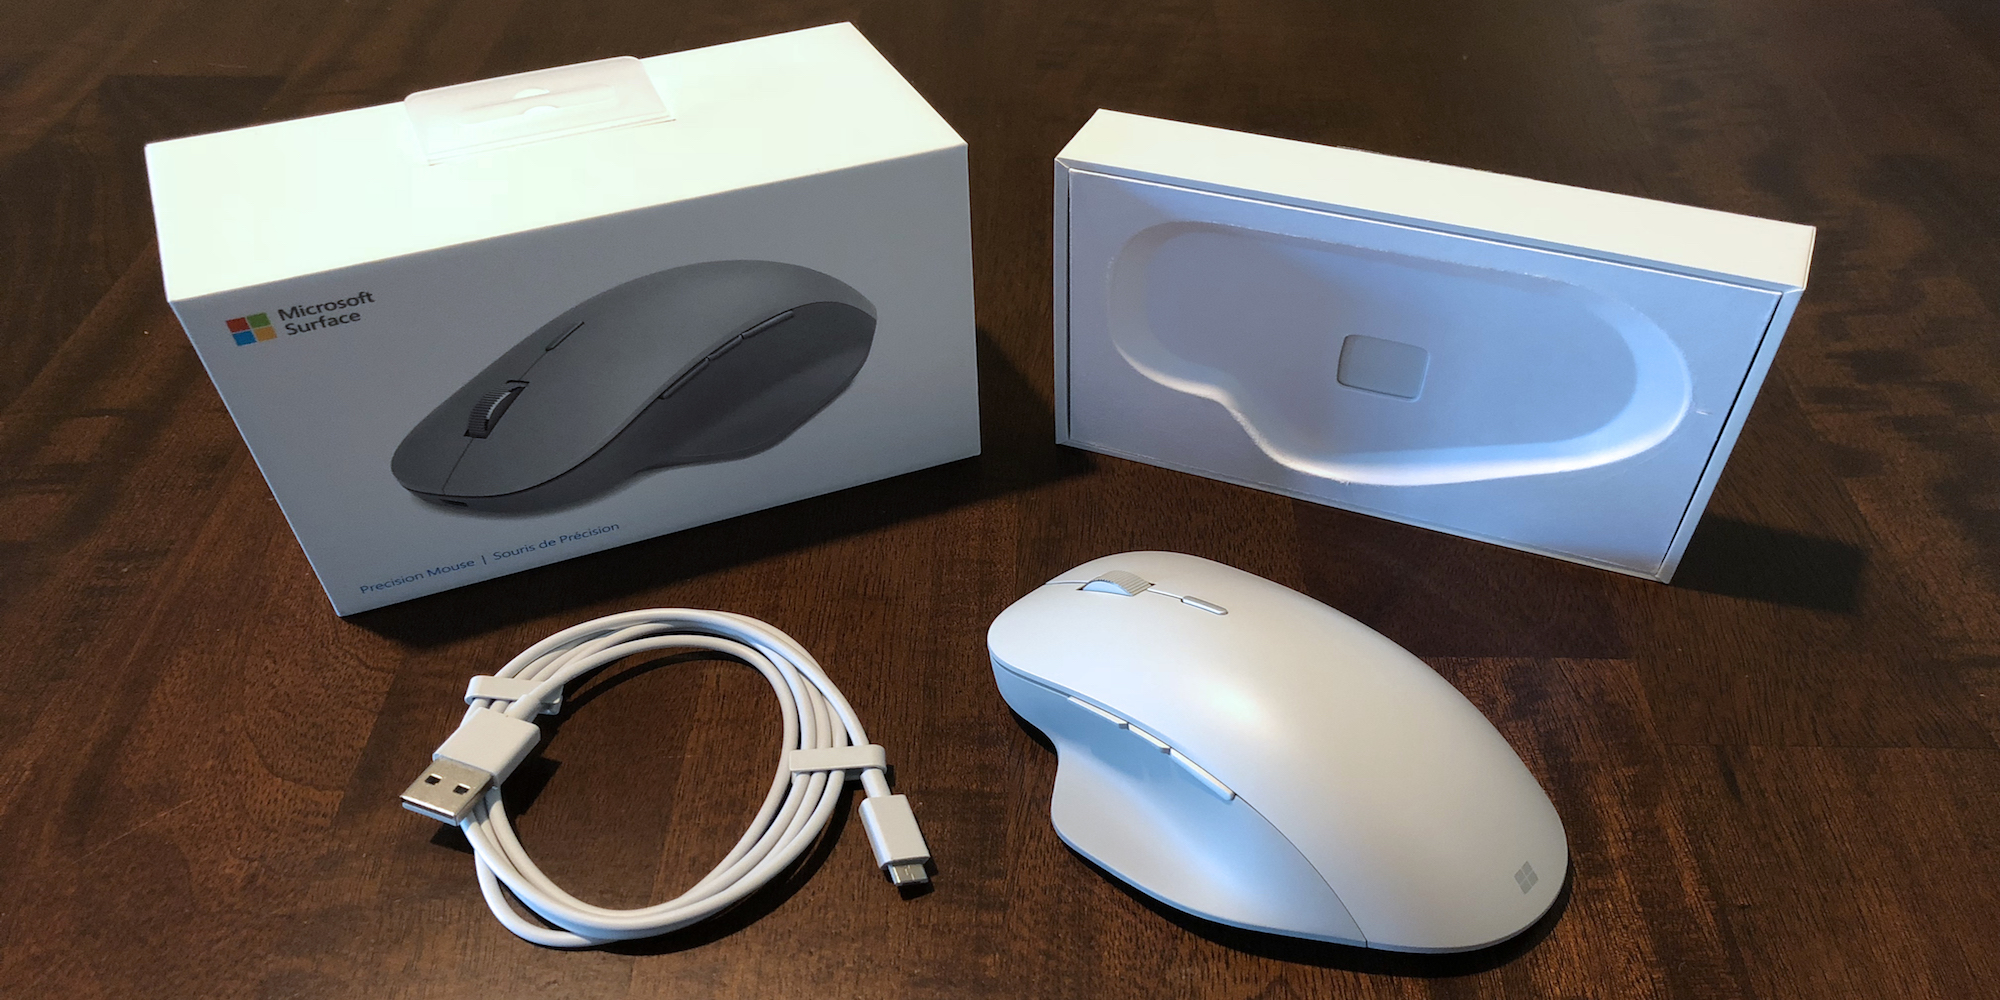 microsoft mouse on macbook